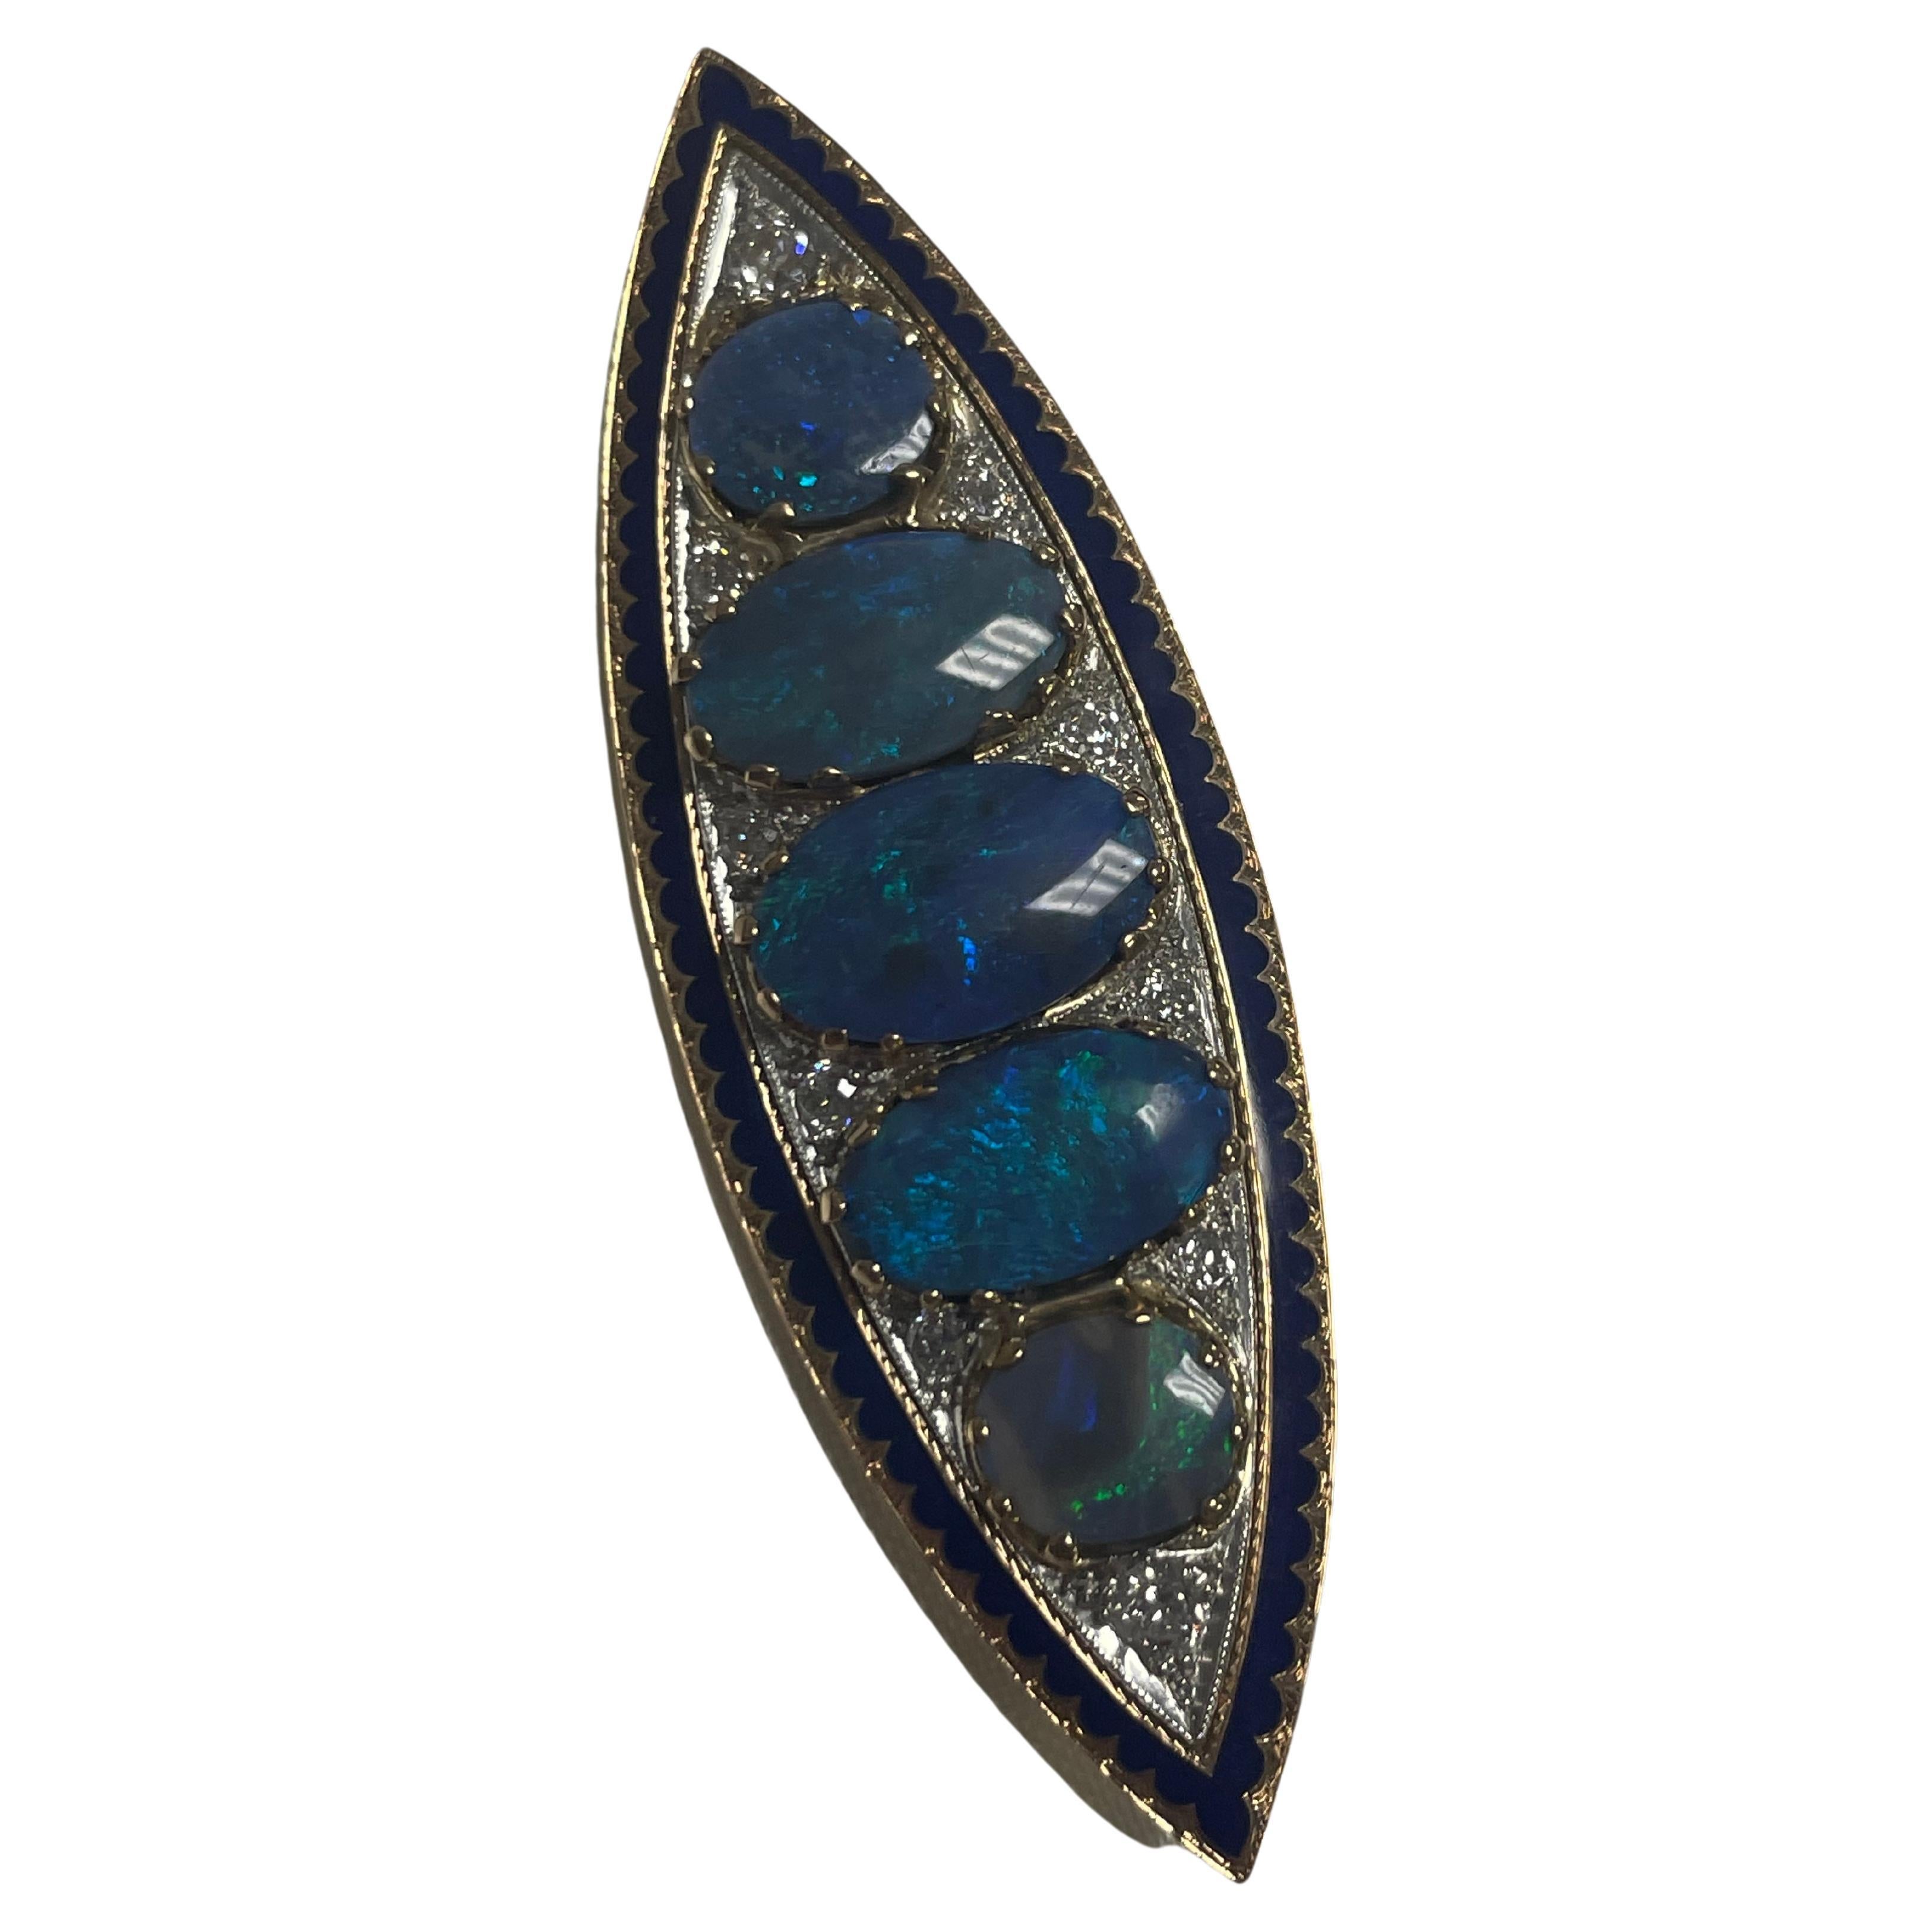 One Lady's Antique Black Opal Broach  For Sale